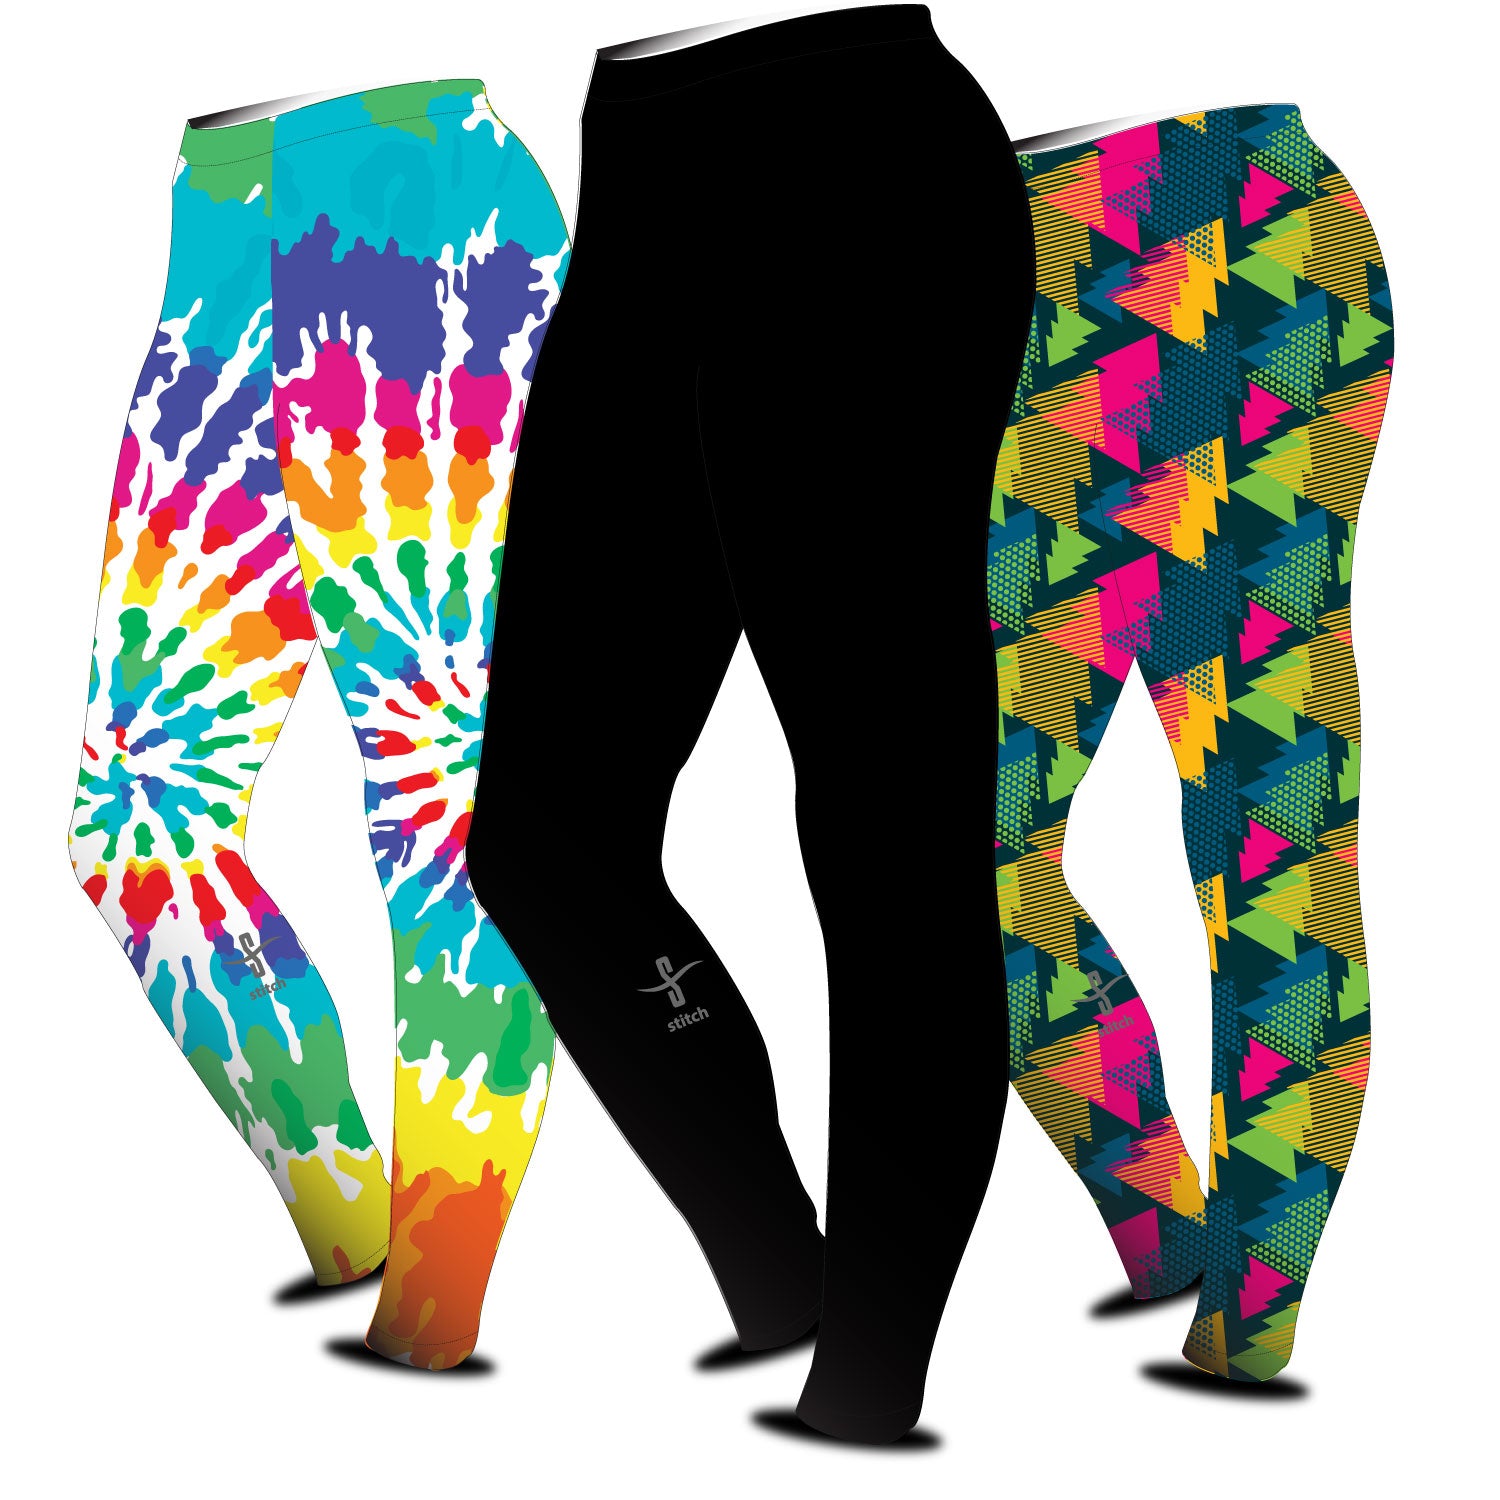 Rowing - Four Leggings for Sale by Hawthorn Mineart